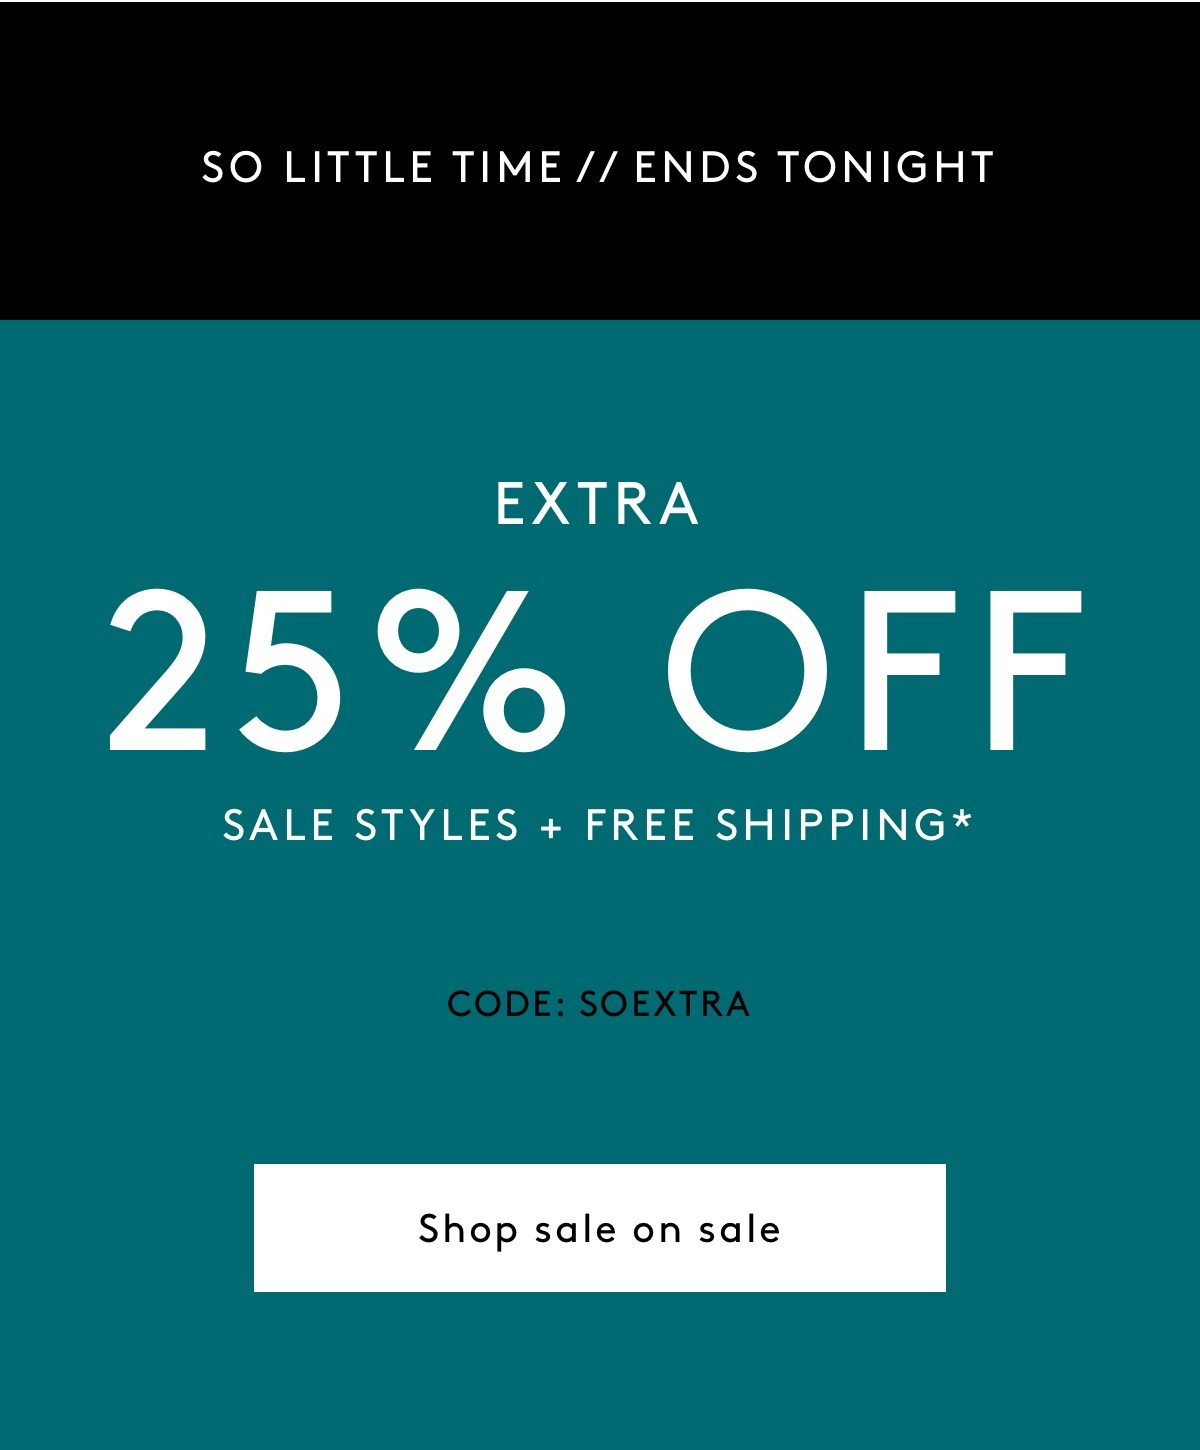 So Little time // Ends Tonight: Extra 25% Off Sale Styles + Free Shipping* Code: SOEXTRA Shop Sale on Sale